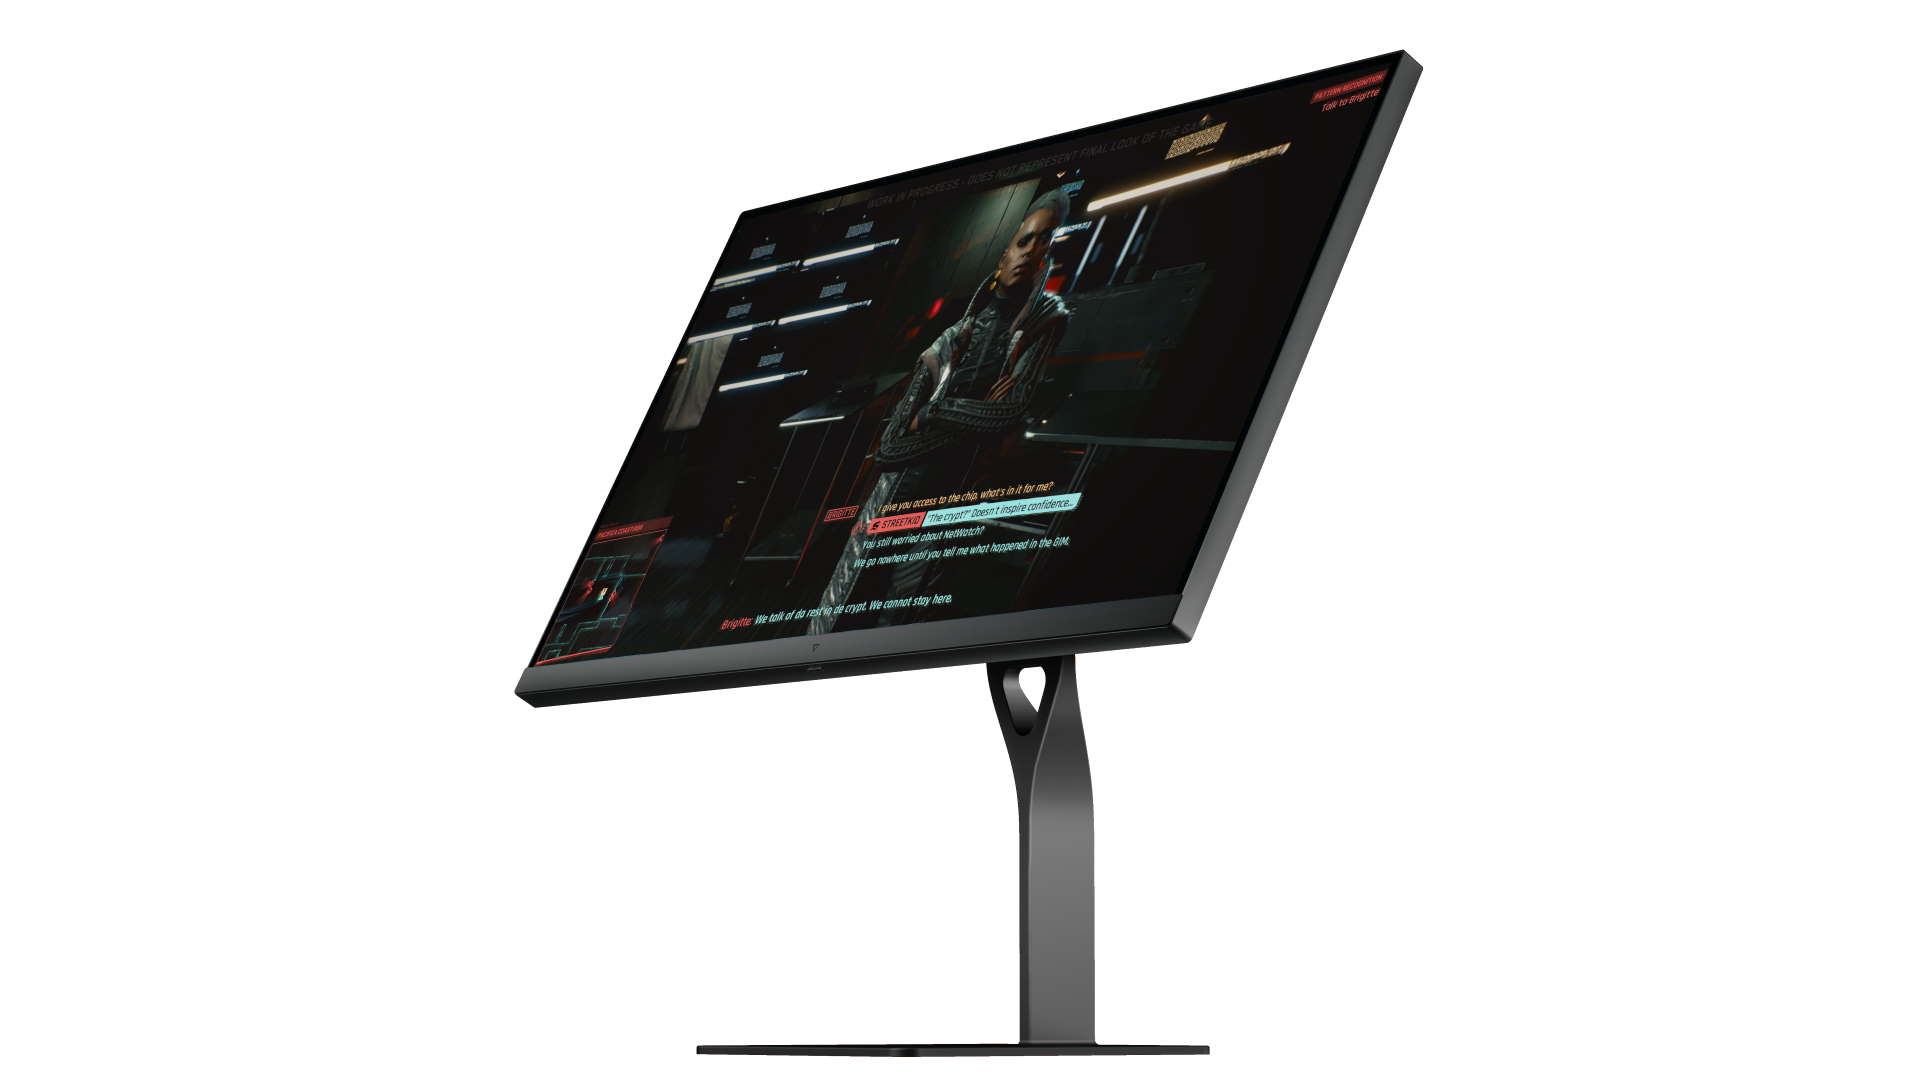 The Best Gaming Monitor Will Be A 499 240hz Ips Display Called The Eve Spectrum Pcgamesn